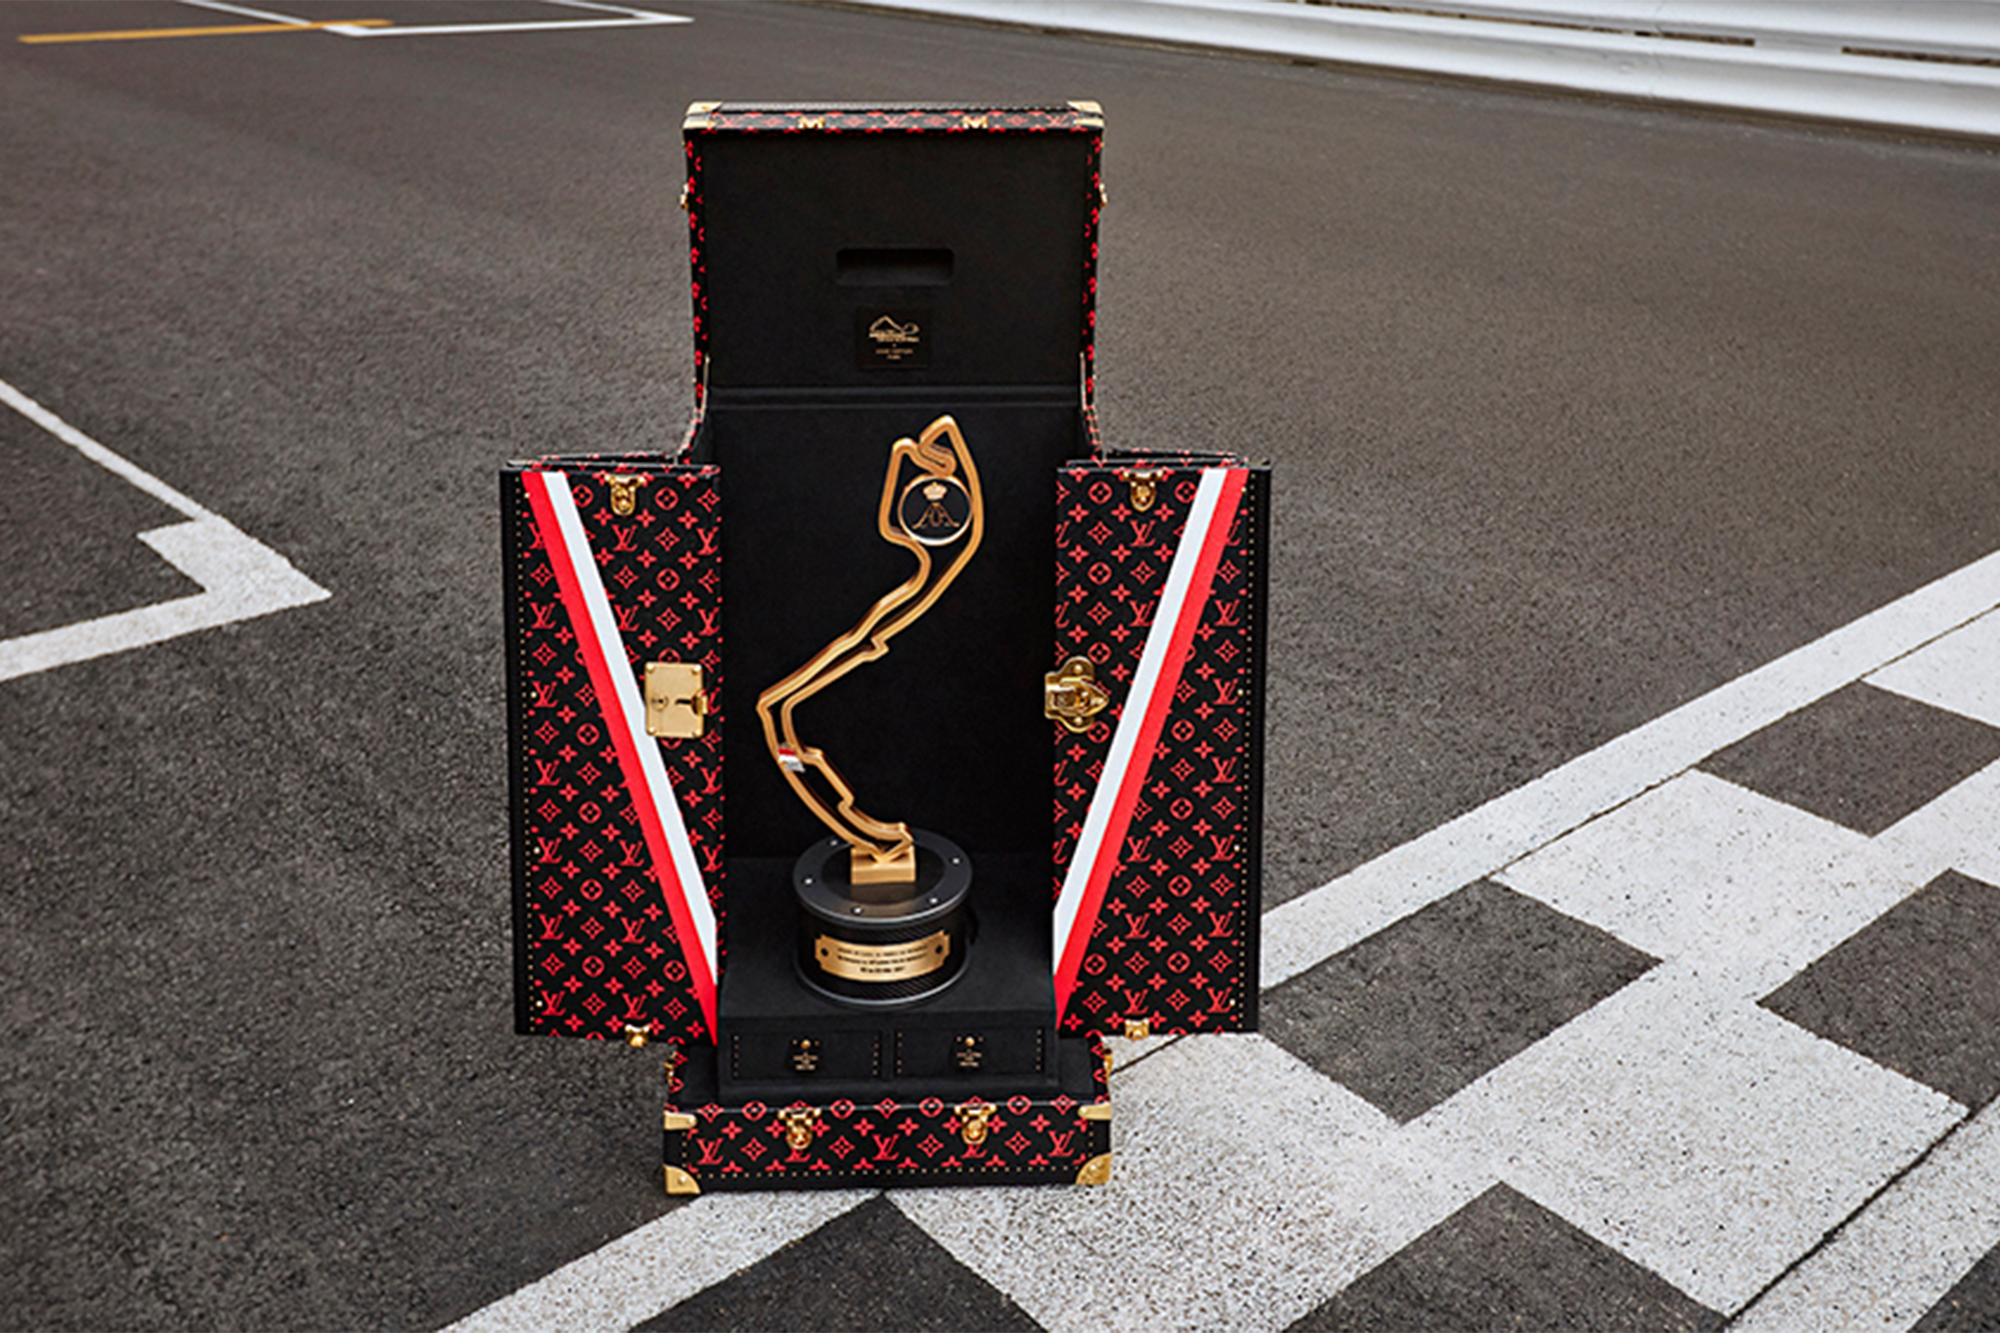 Louis Vuitton on X: Victory travels in Louis Vuitton. This year